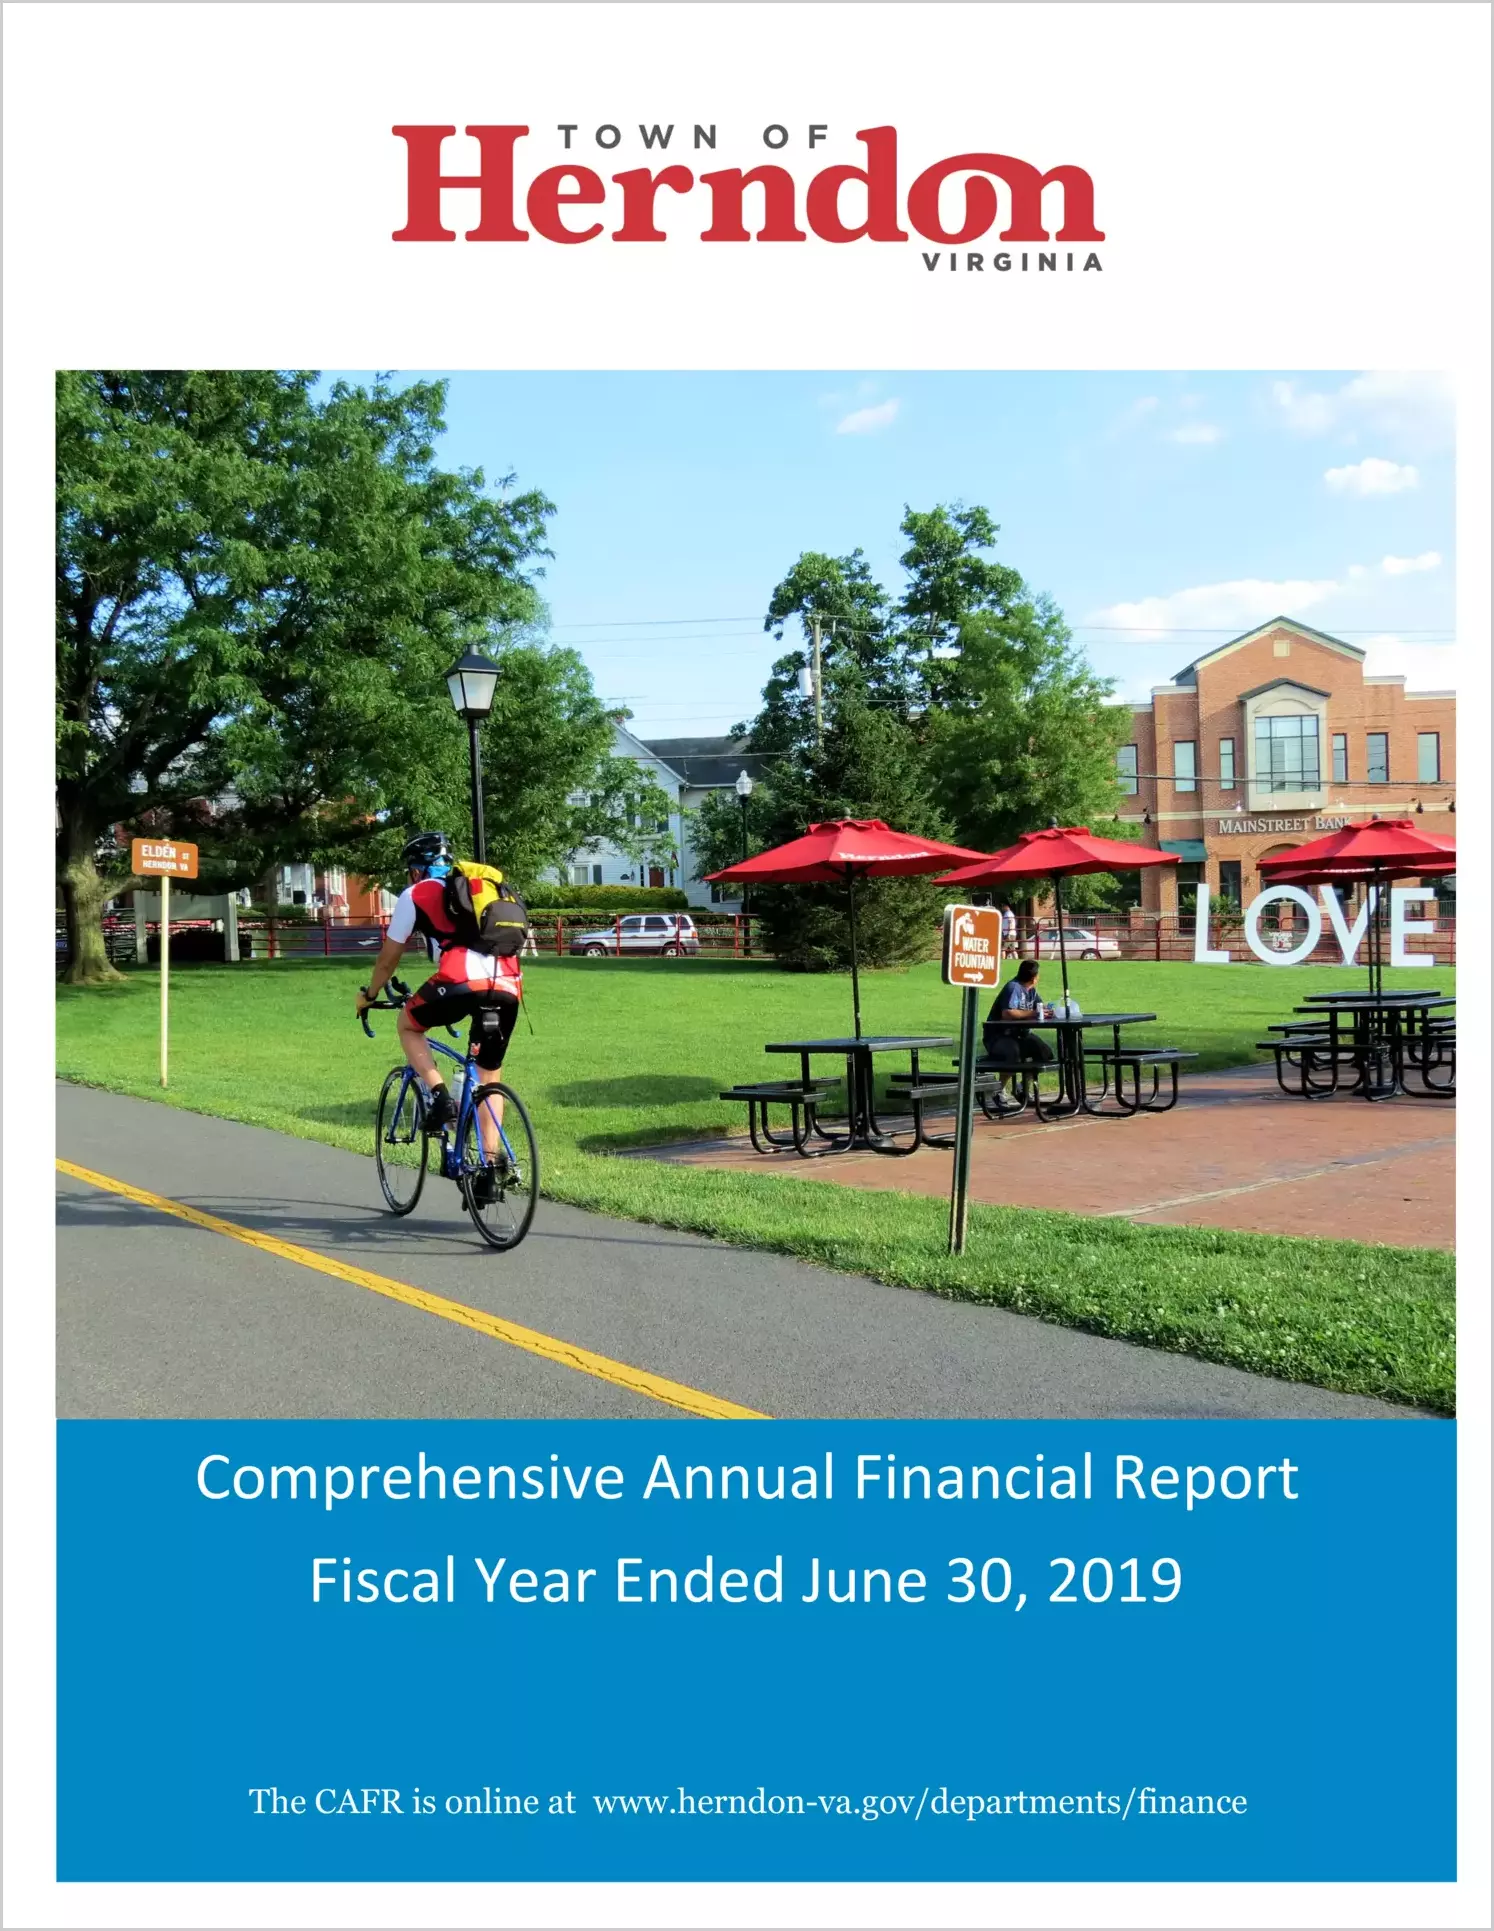 2019 Annual Financial Report for Town of Herndon